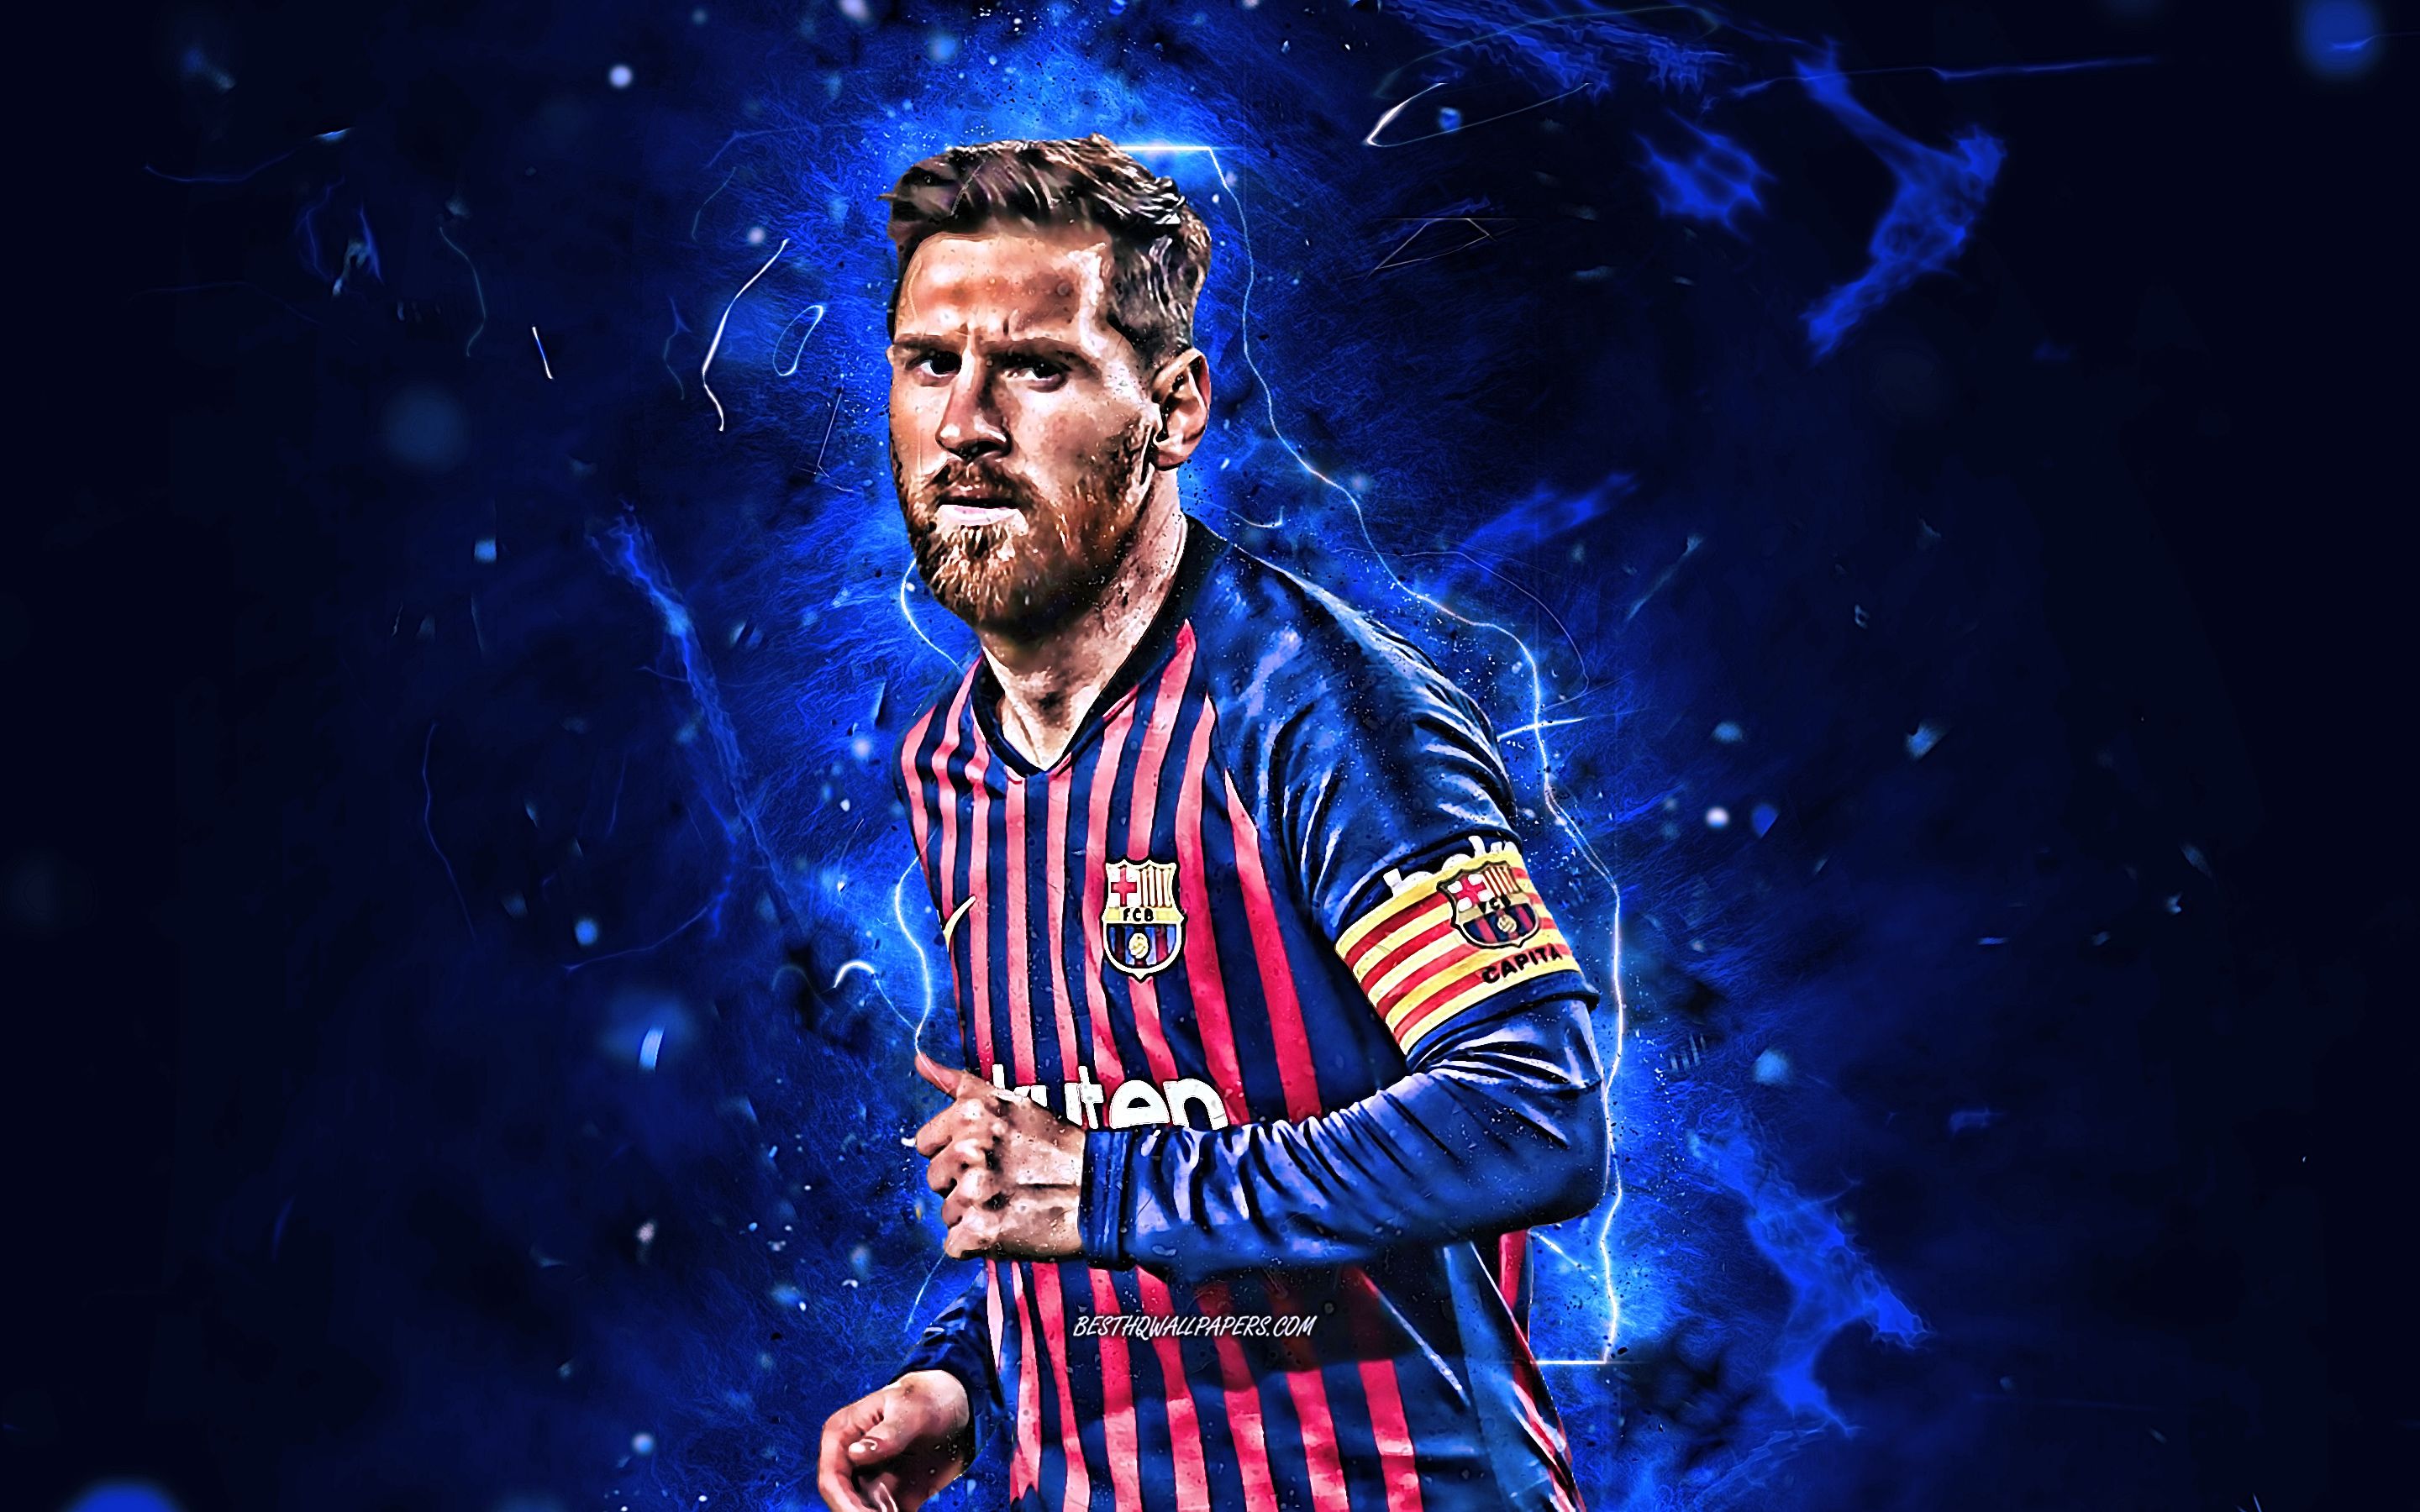 Download Wallpaper Messi, FCB, Barcelona FC, Close Up, Argentinian Footballers, La Liga, Lionel Messi, Leo Messi, Neon Lights, LaLiga, Barca, Soccer, Football Stars For Desktop With Resolution 2880x1800. High Quality HD Picture Wallpaper